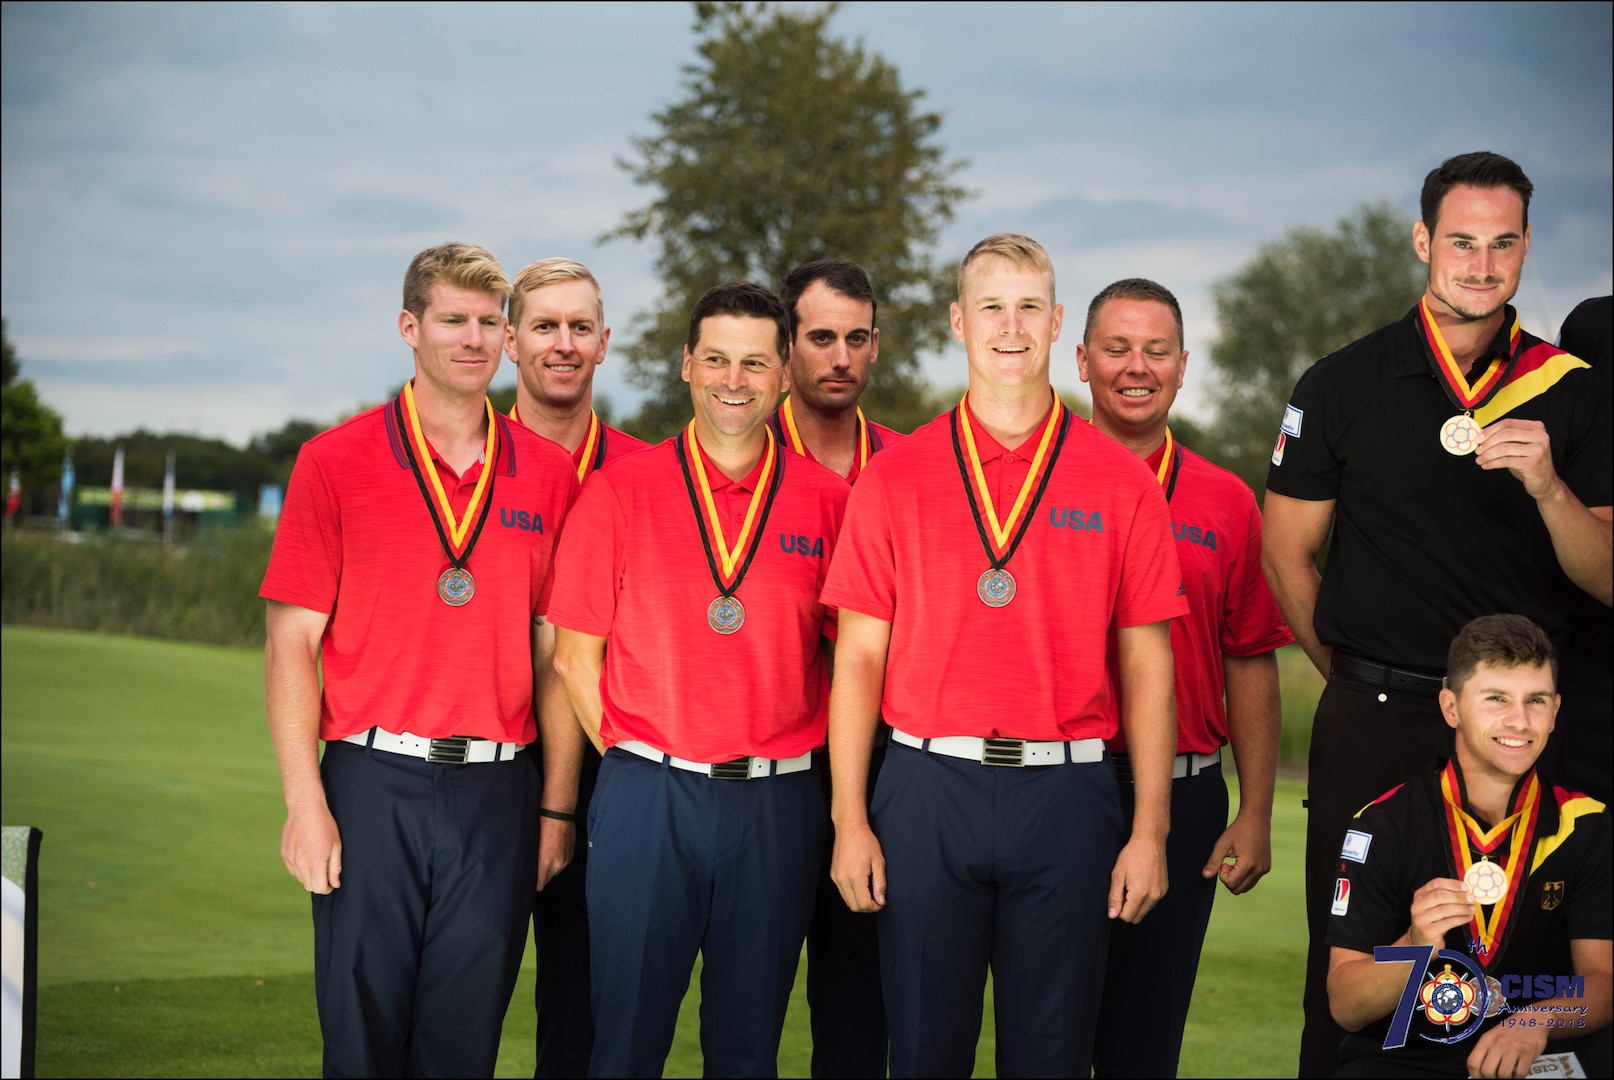 The 2018 Conseil International du Sport Militaire (CISM) World Military Golf Championship hosted by the German Armed Forces in Warendorf, Germany August 26 to September 2.  Military golfers from around the world compete for gold.